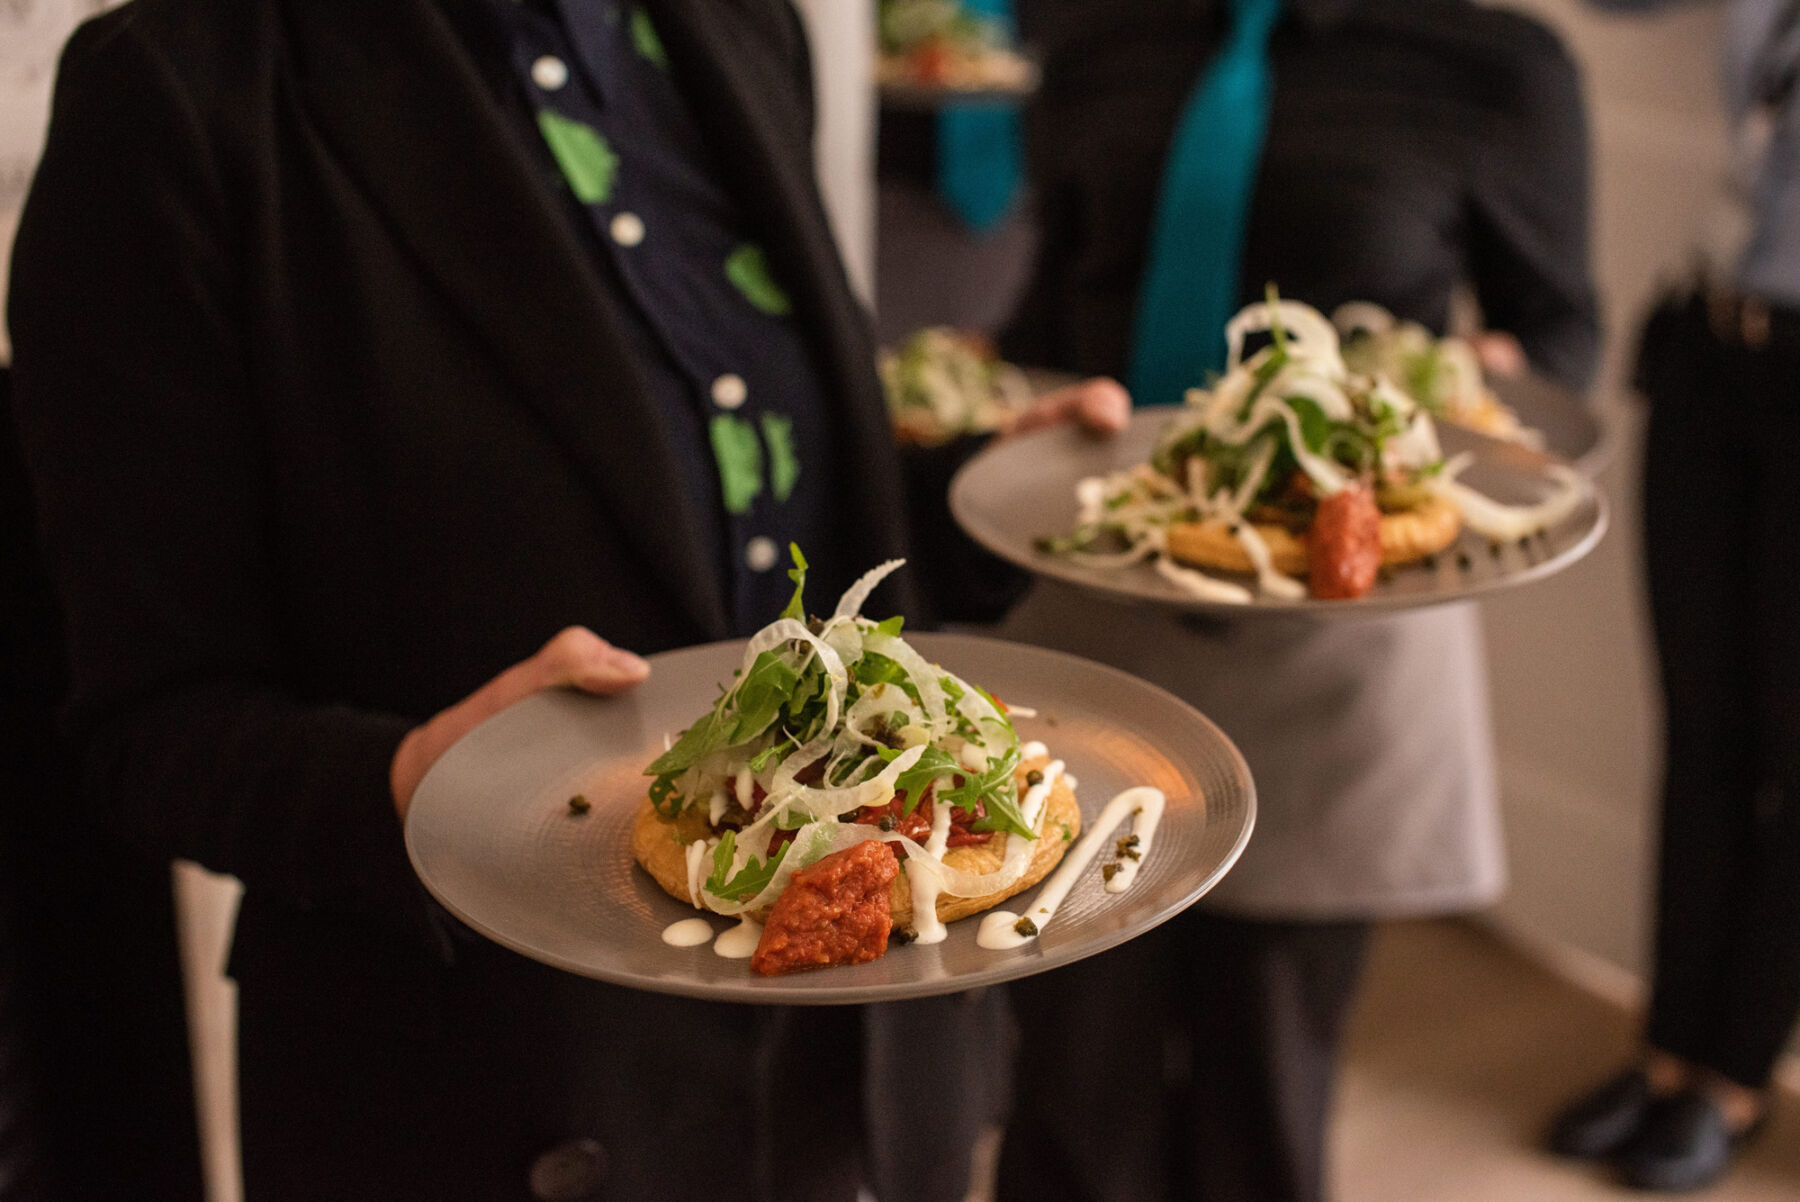 Ethical wedding food served at RSA House, sustainable London wedding venue